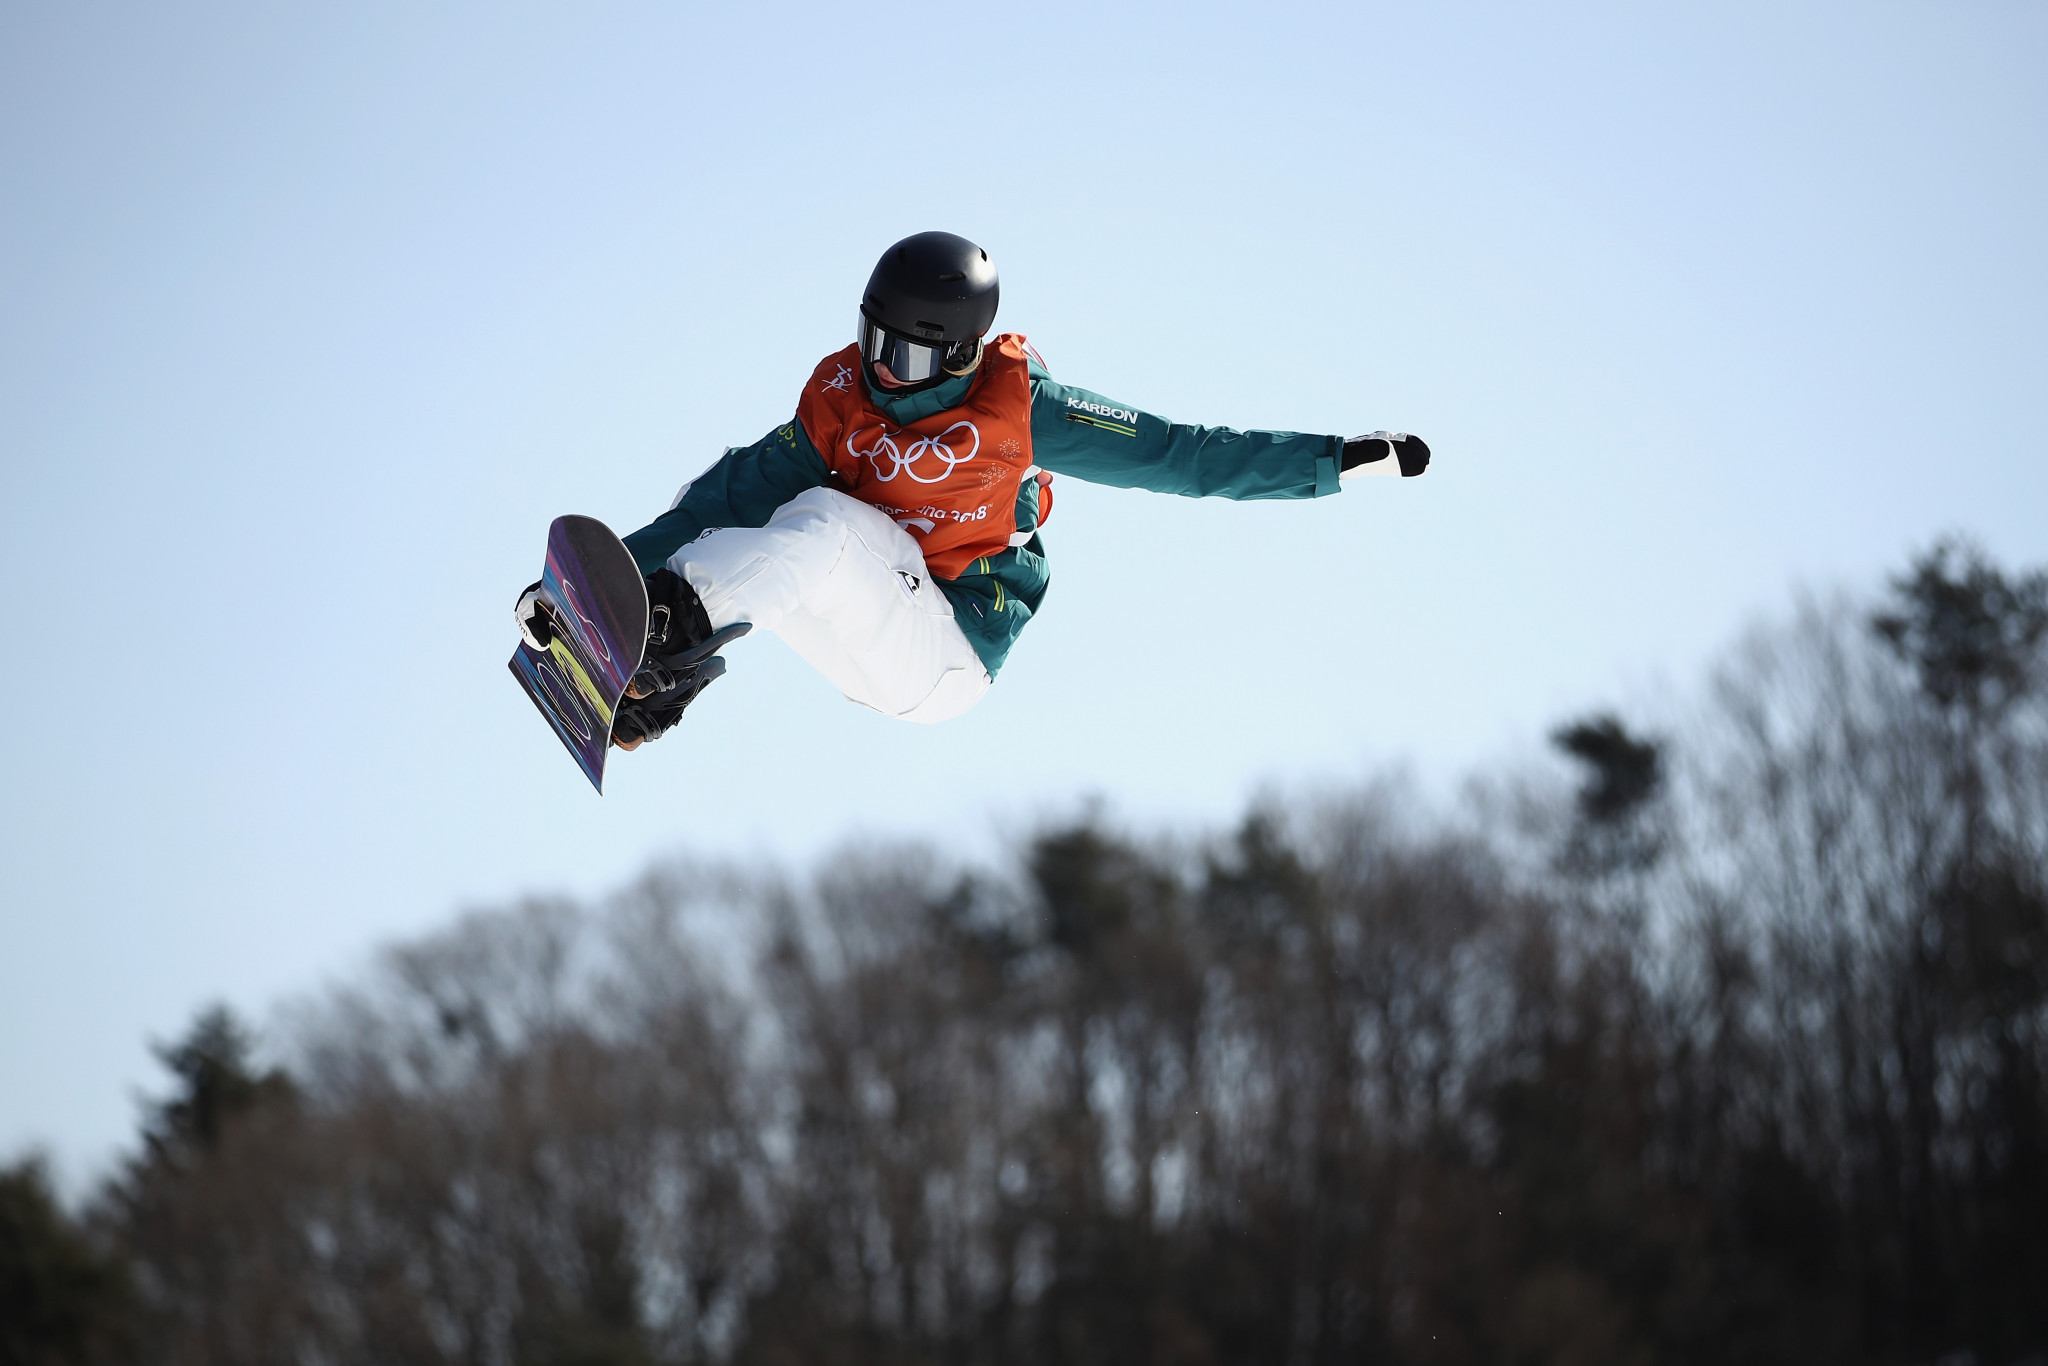 Australia's Tess Coady outshone her rivals in the women's slopestyle event ©Getty Images